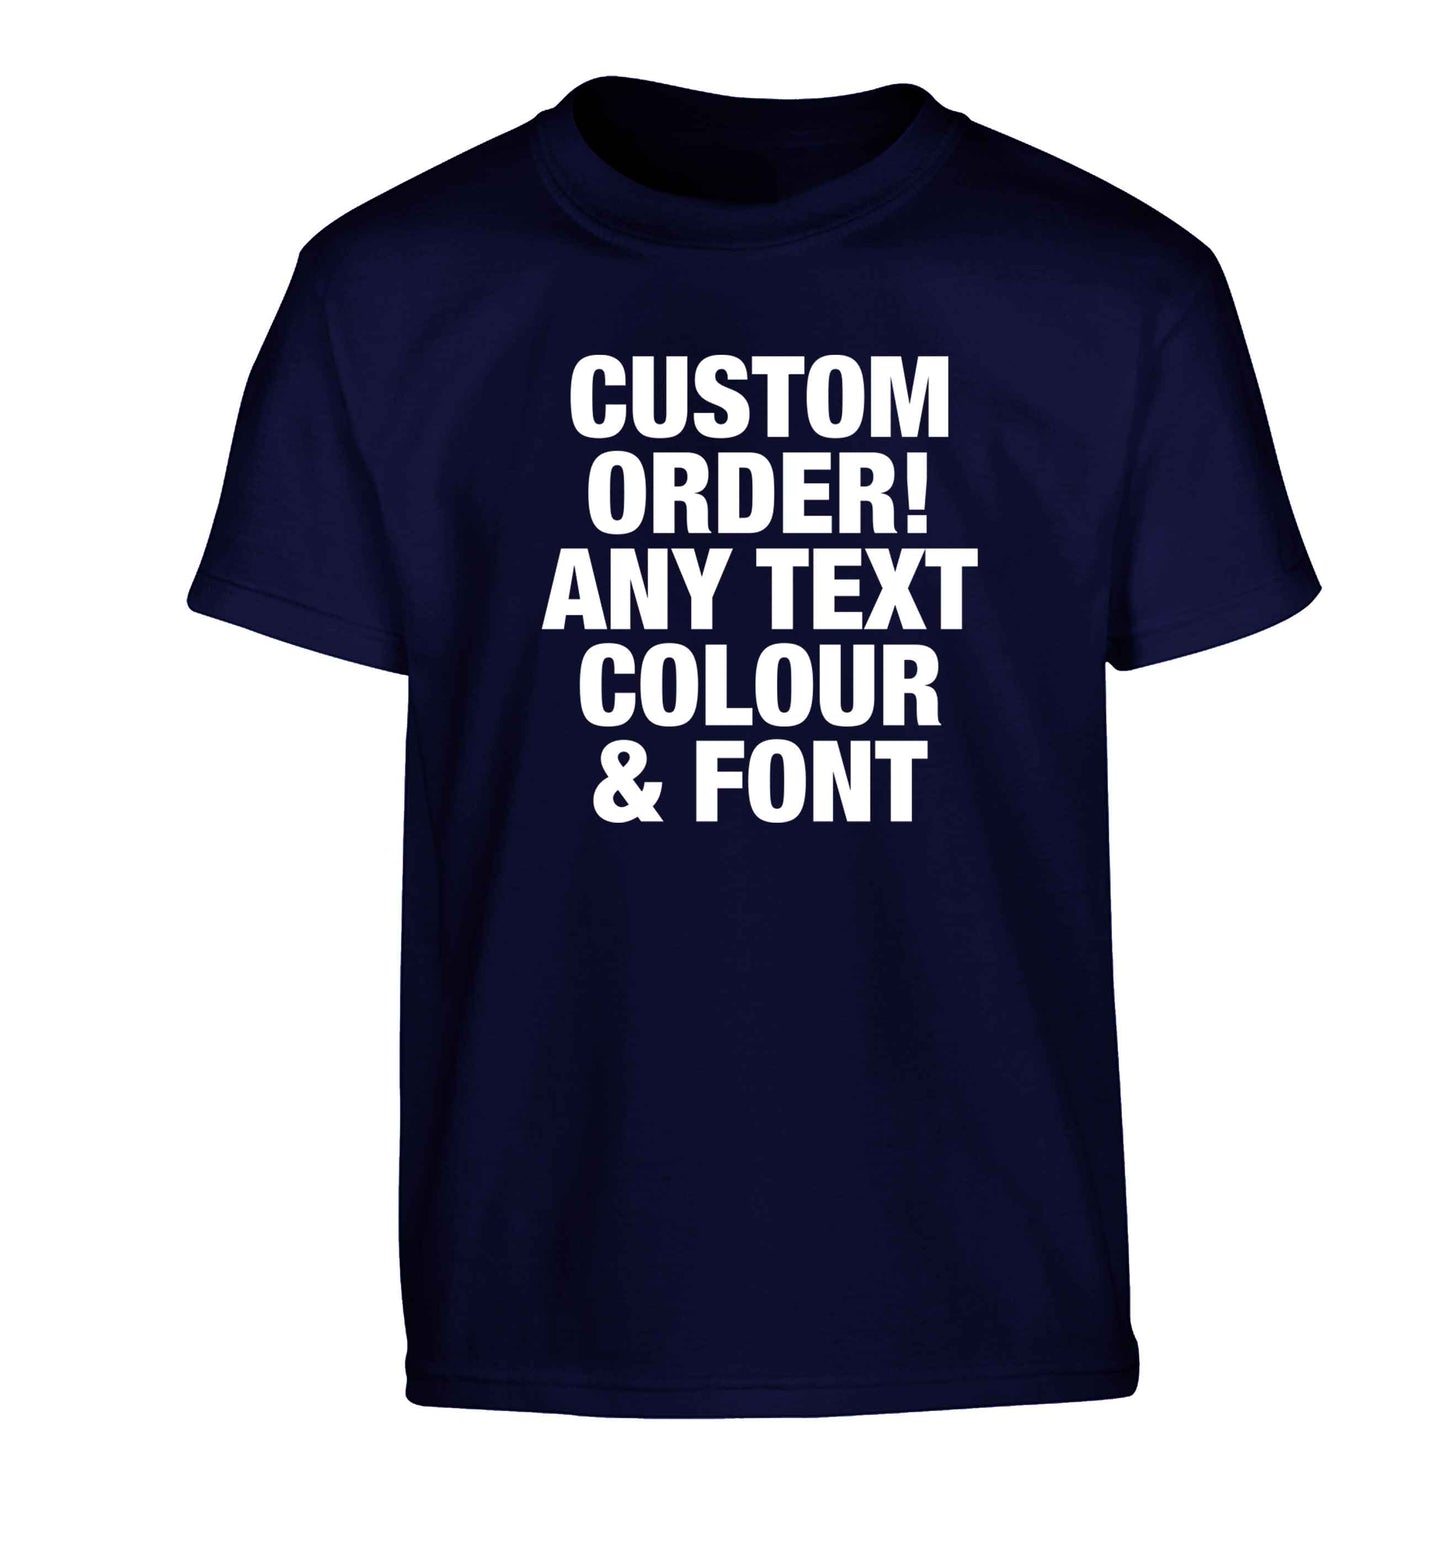 Custom order any text colour and font Children's navy Tshirt 12-13 Years